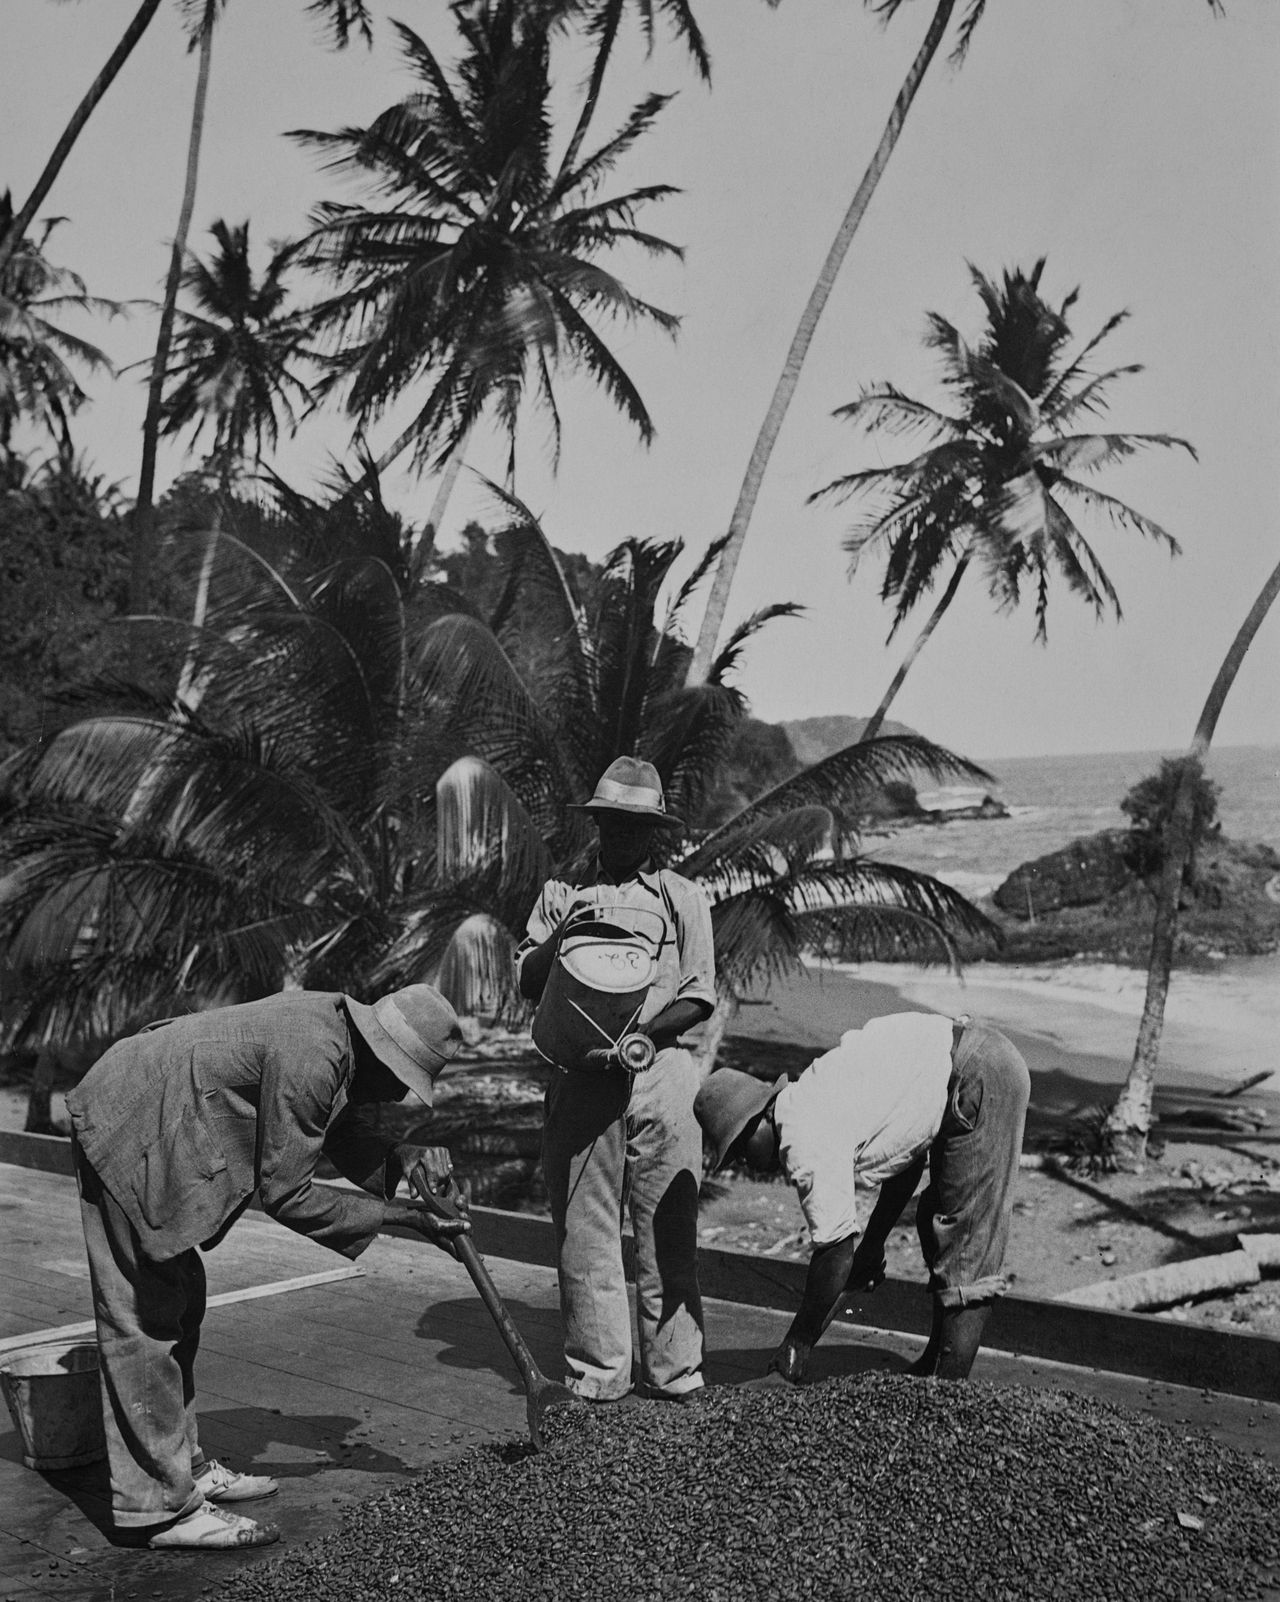 Two men work with shovels, with a third man standing with a watering can as they prepare cocoa beans on Tobago, Trinidad and Tobago, circa 1935. Tobago is the southernmost island in the Caribbean. (Photo by Fox Photos/Hulton Archive/Getty Images)